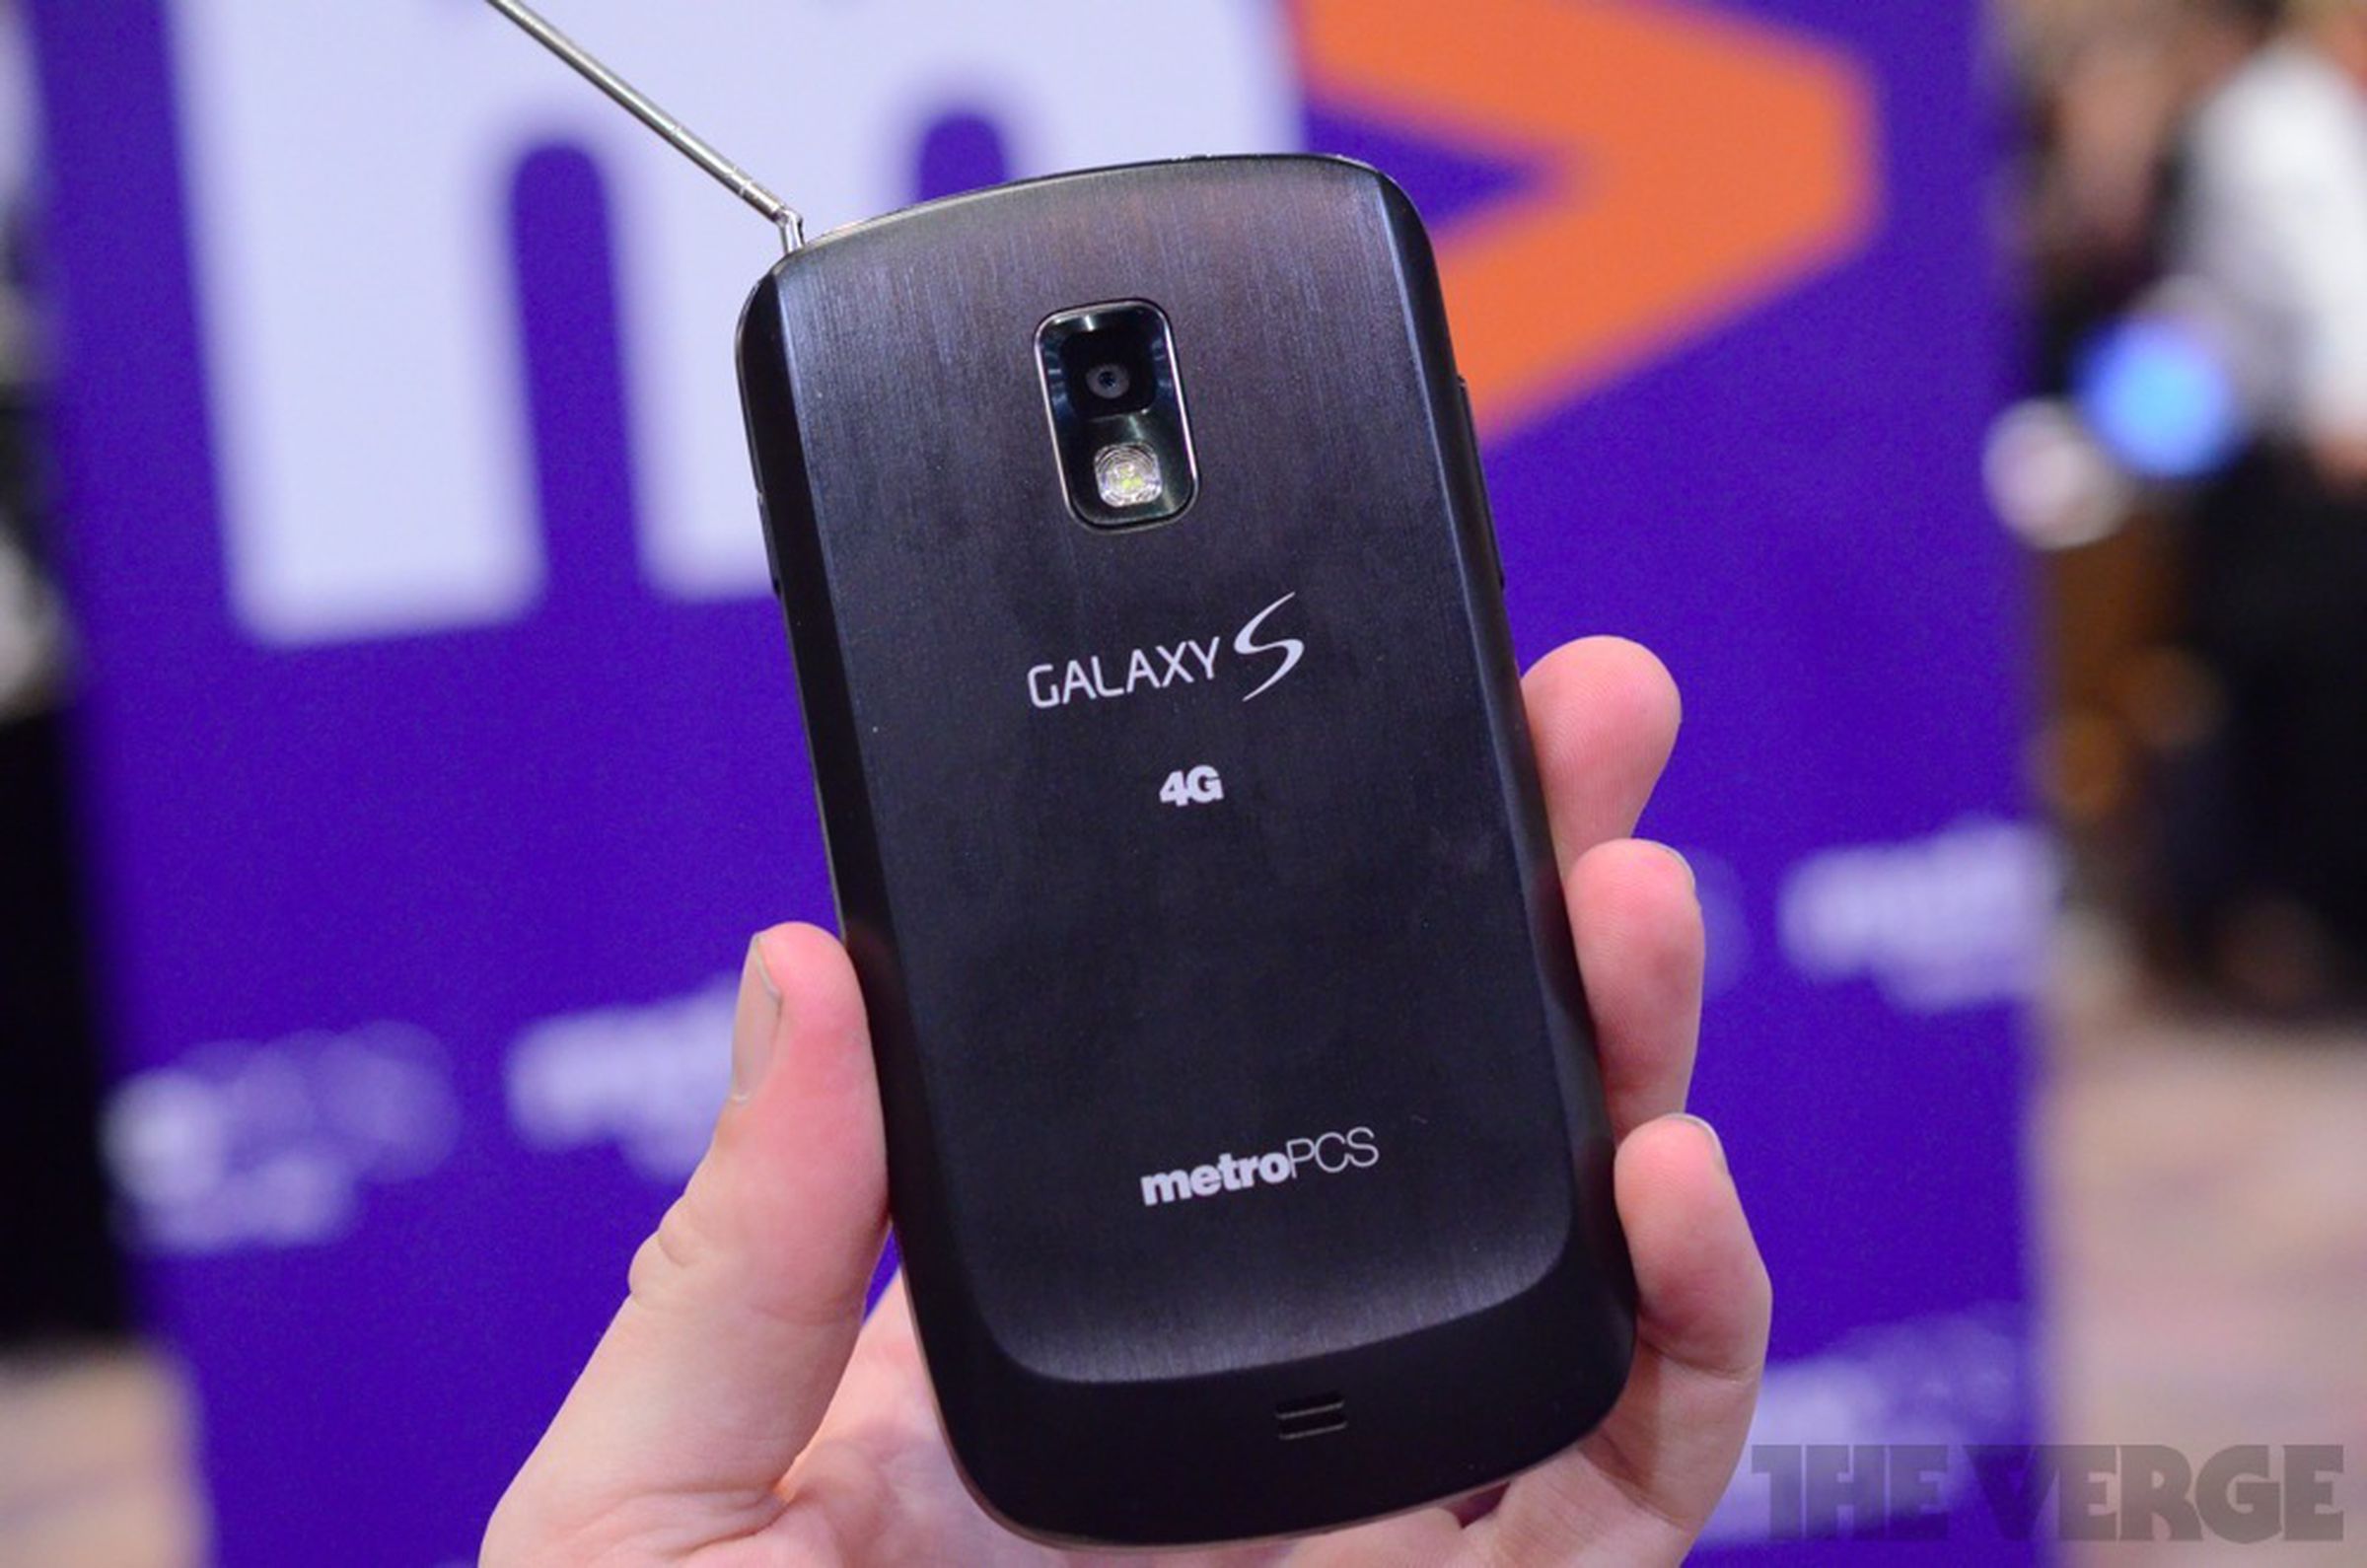 Samsung Galaxy Attain 4G, LG Connect 4G, Dyle TV hands-on